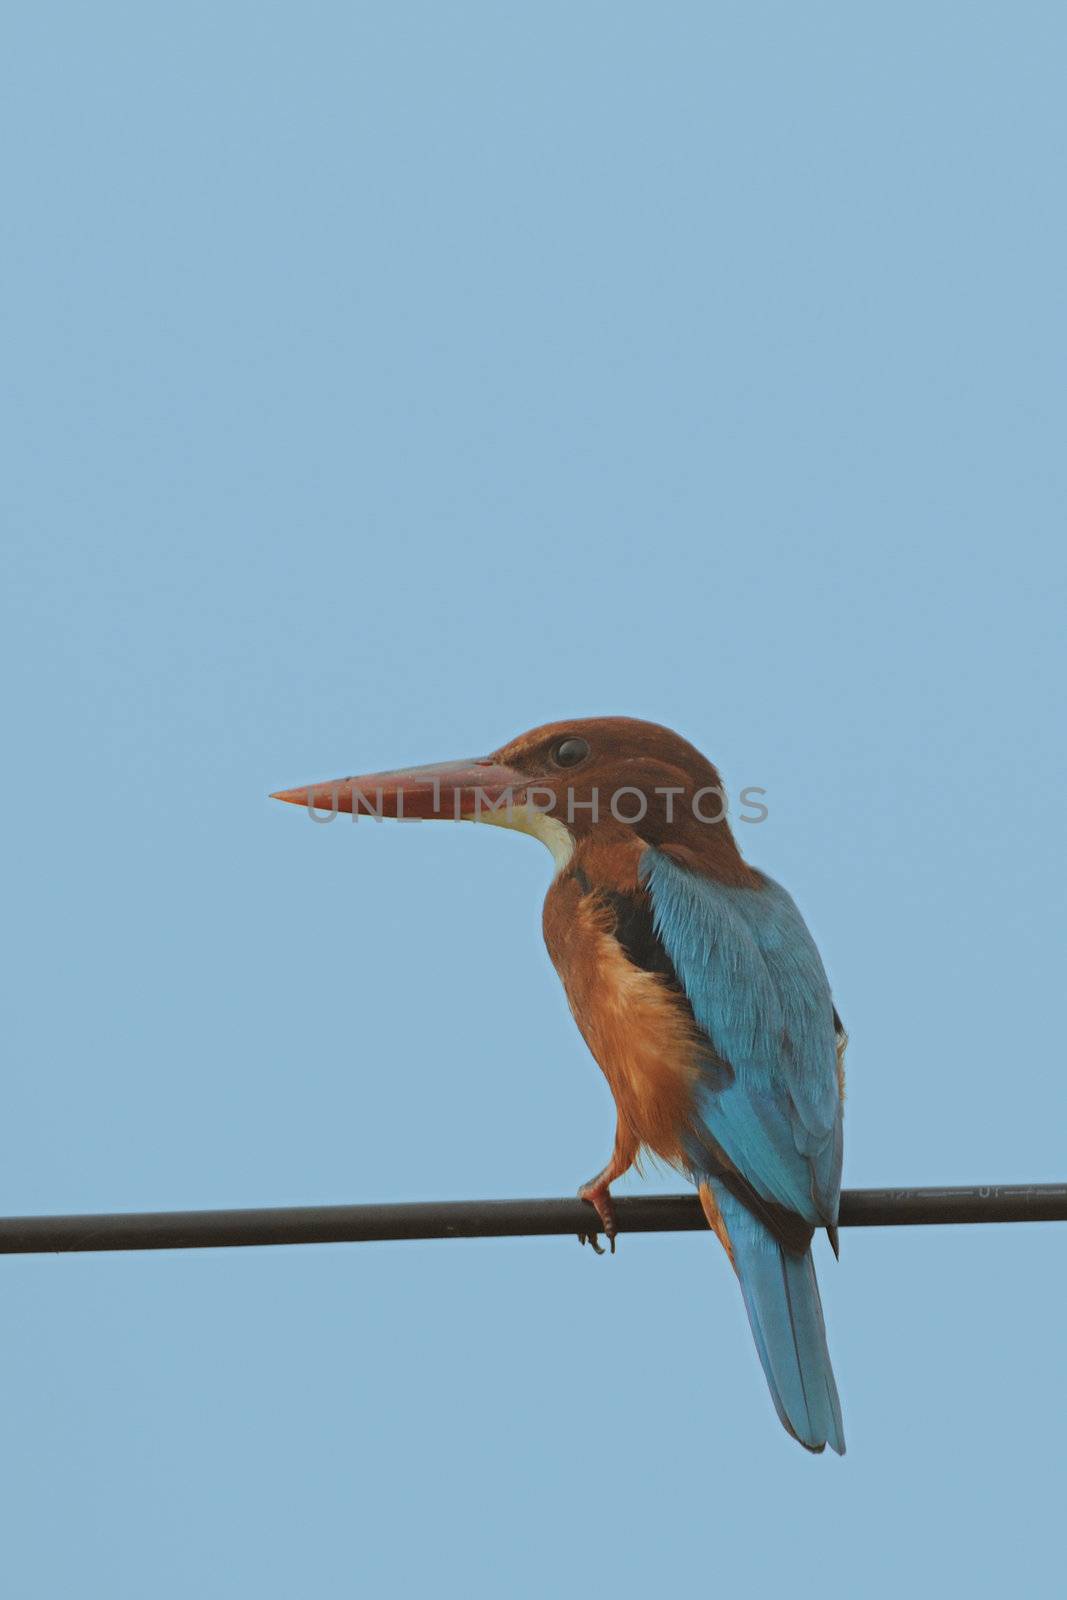 A beautiful kingisher perching on a electric pole